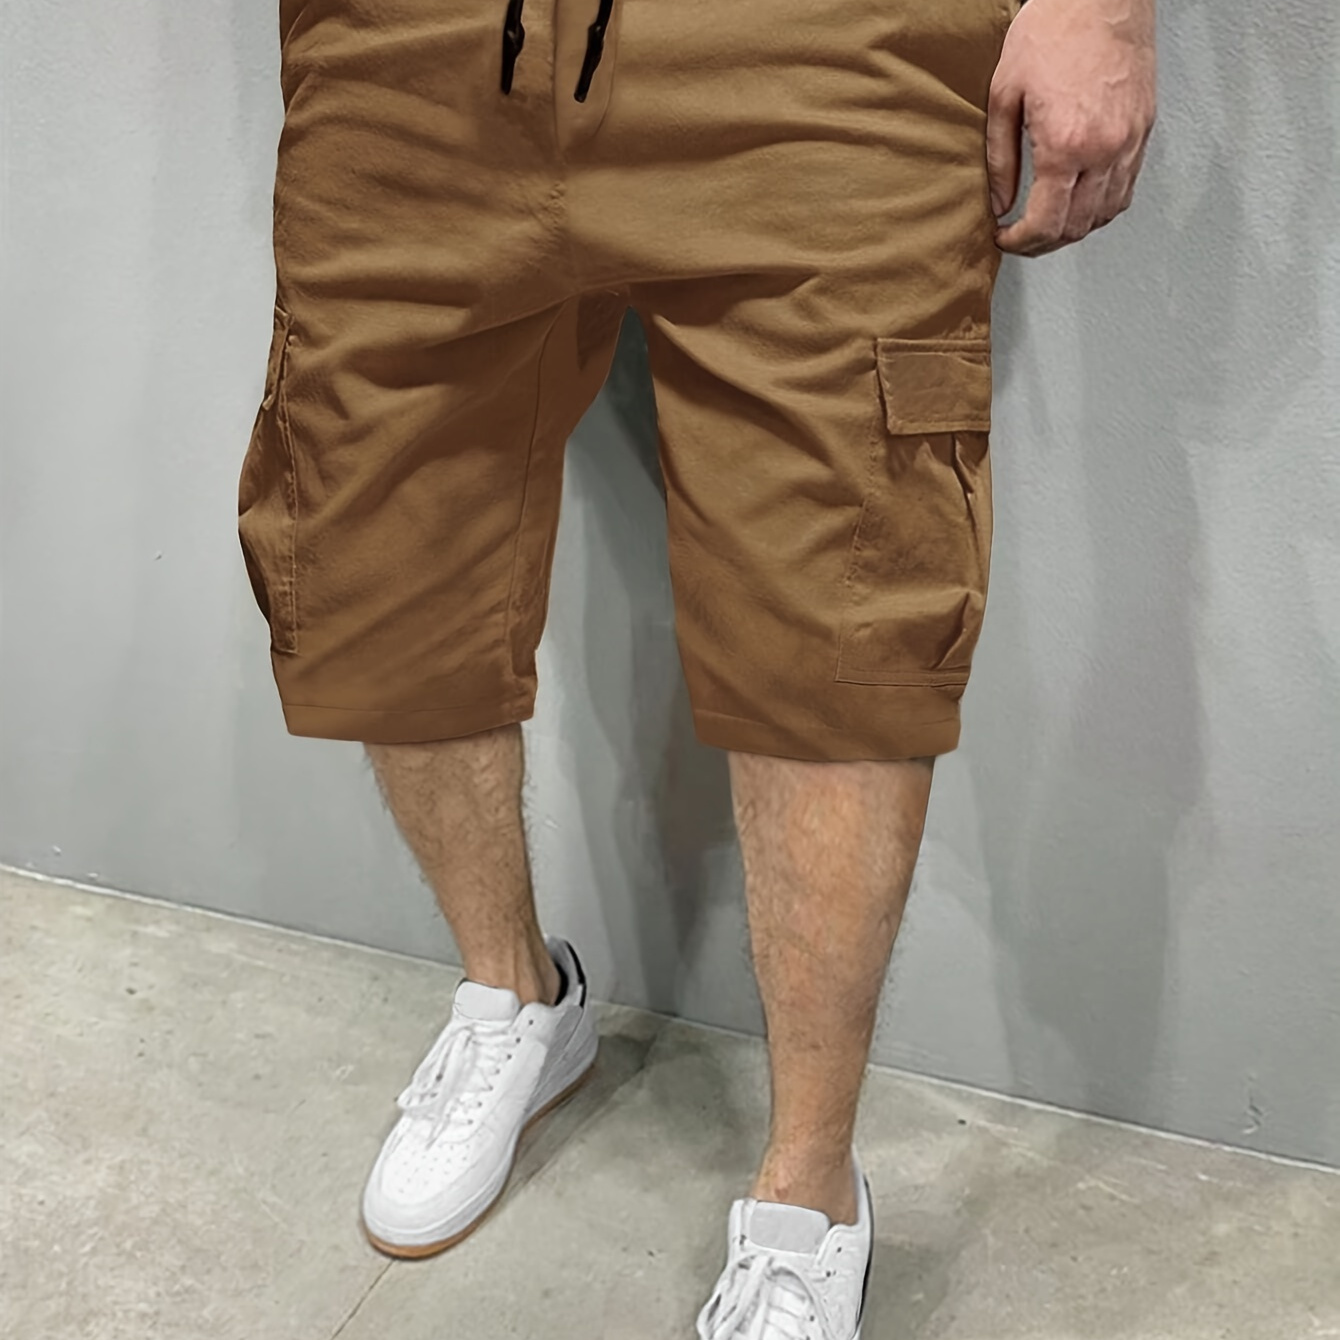 

Men's Street Style Loose-fit Cargo Shorts With Multiple Pockets, Casual Urban Fashion Clothing, For Summer Outdoor Sports Hiking